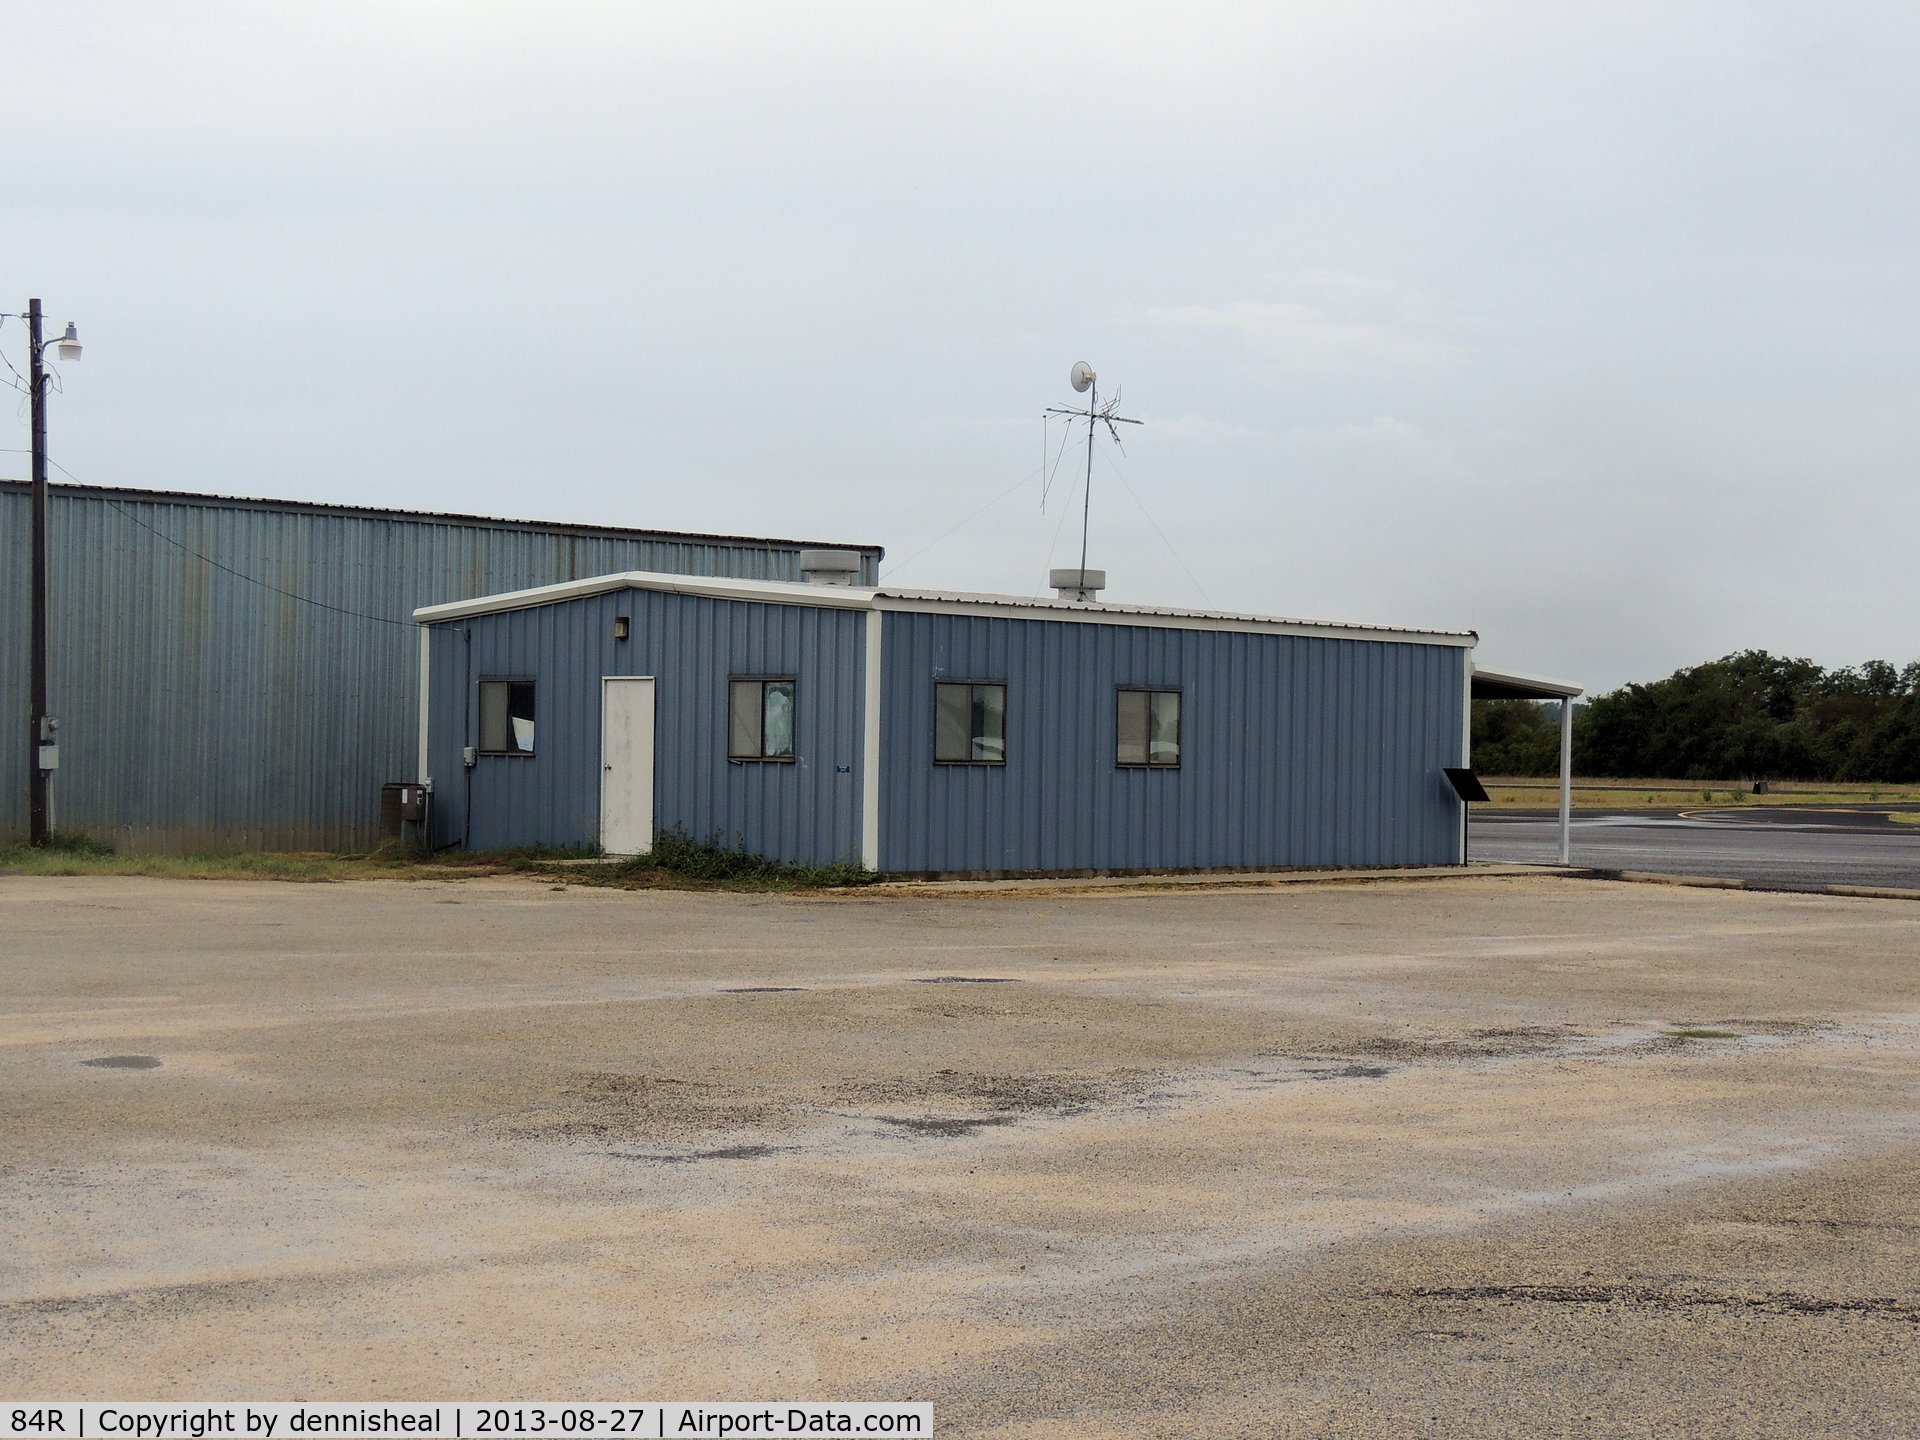 Smithville Crawford Municipal Airport (84R) - AIRPORT OFFICE